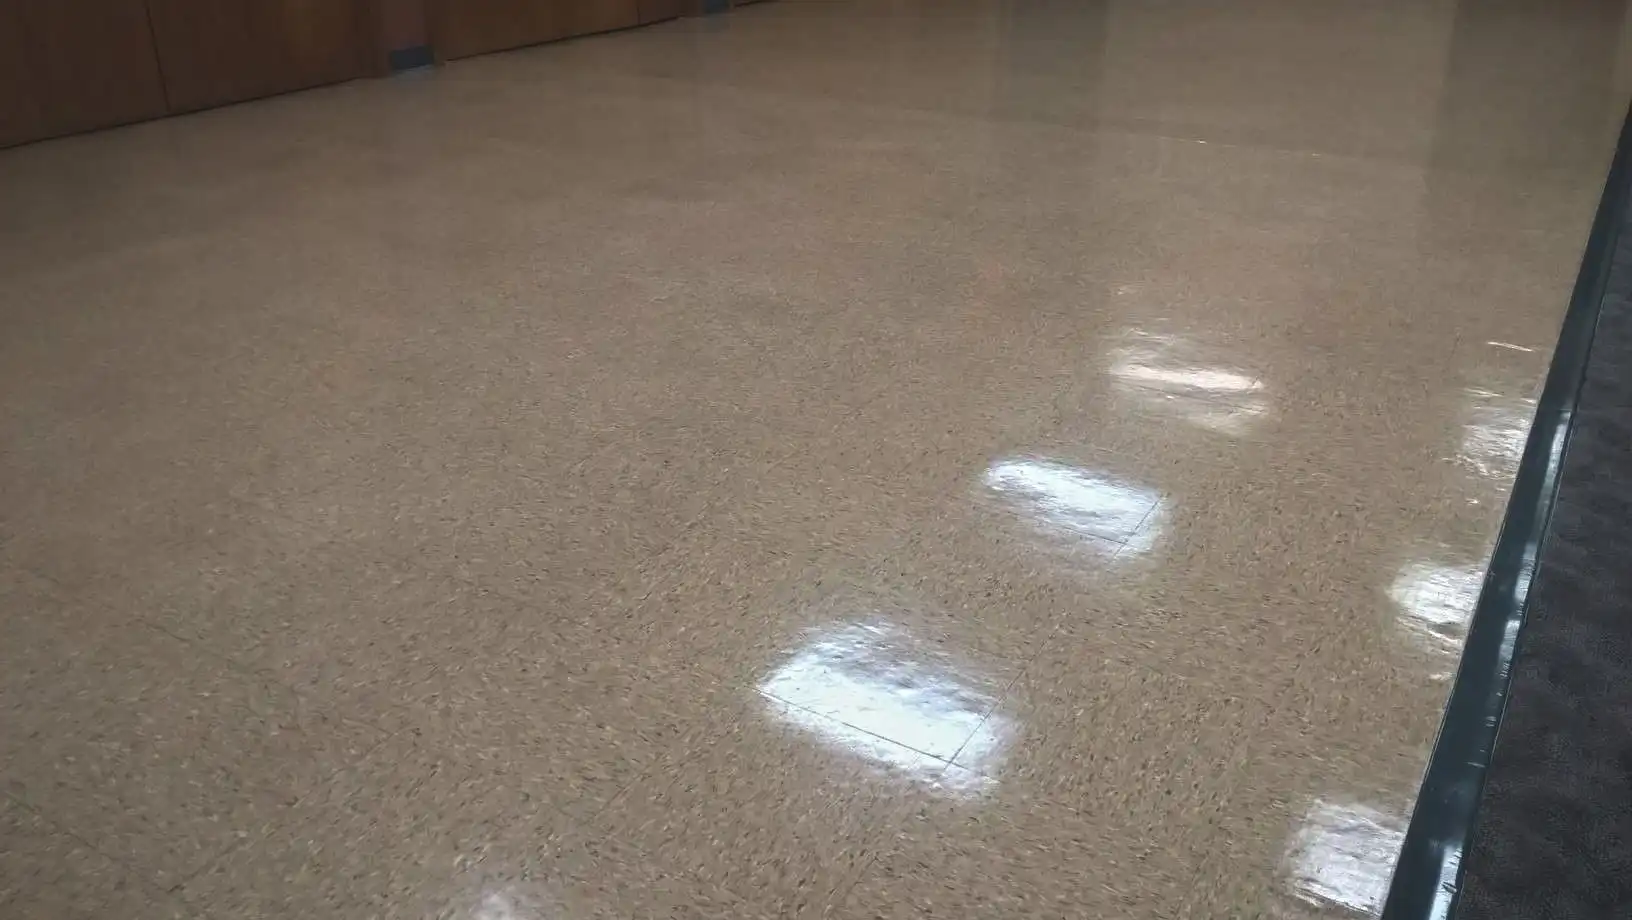 vct-vinyl-floor-scrub-and-re-coat-services-in-hanover